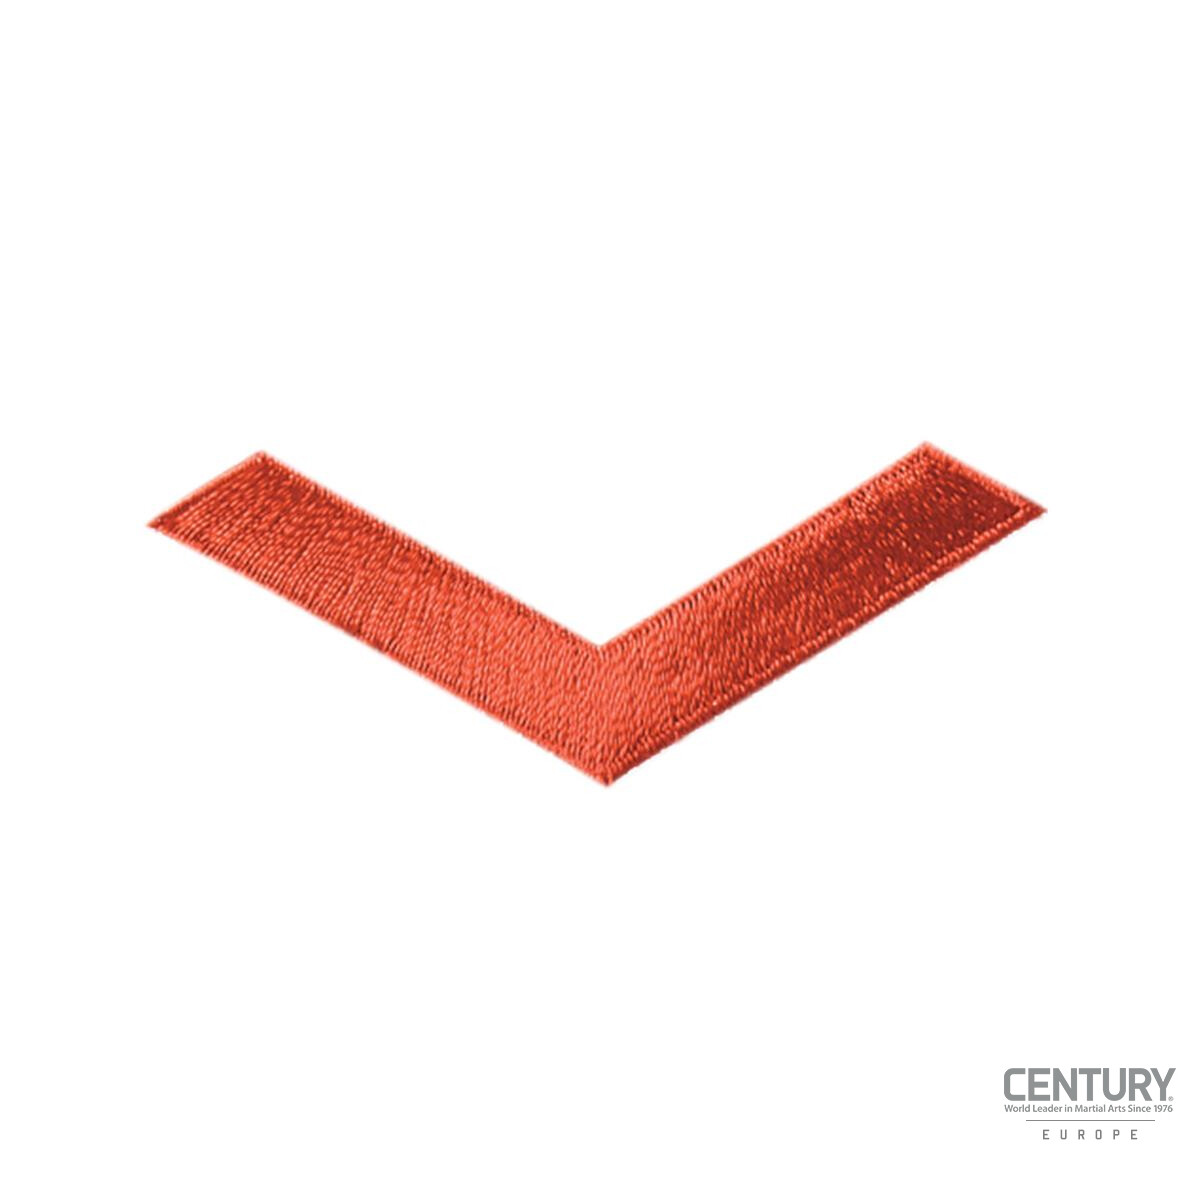 Chevron Patch Red